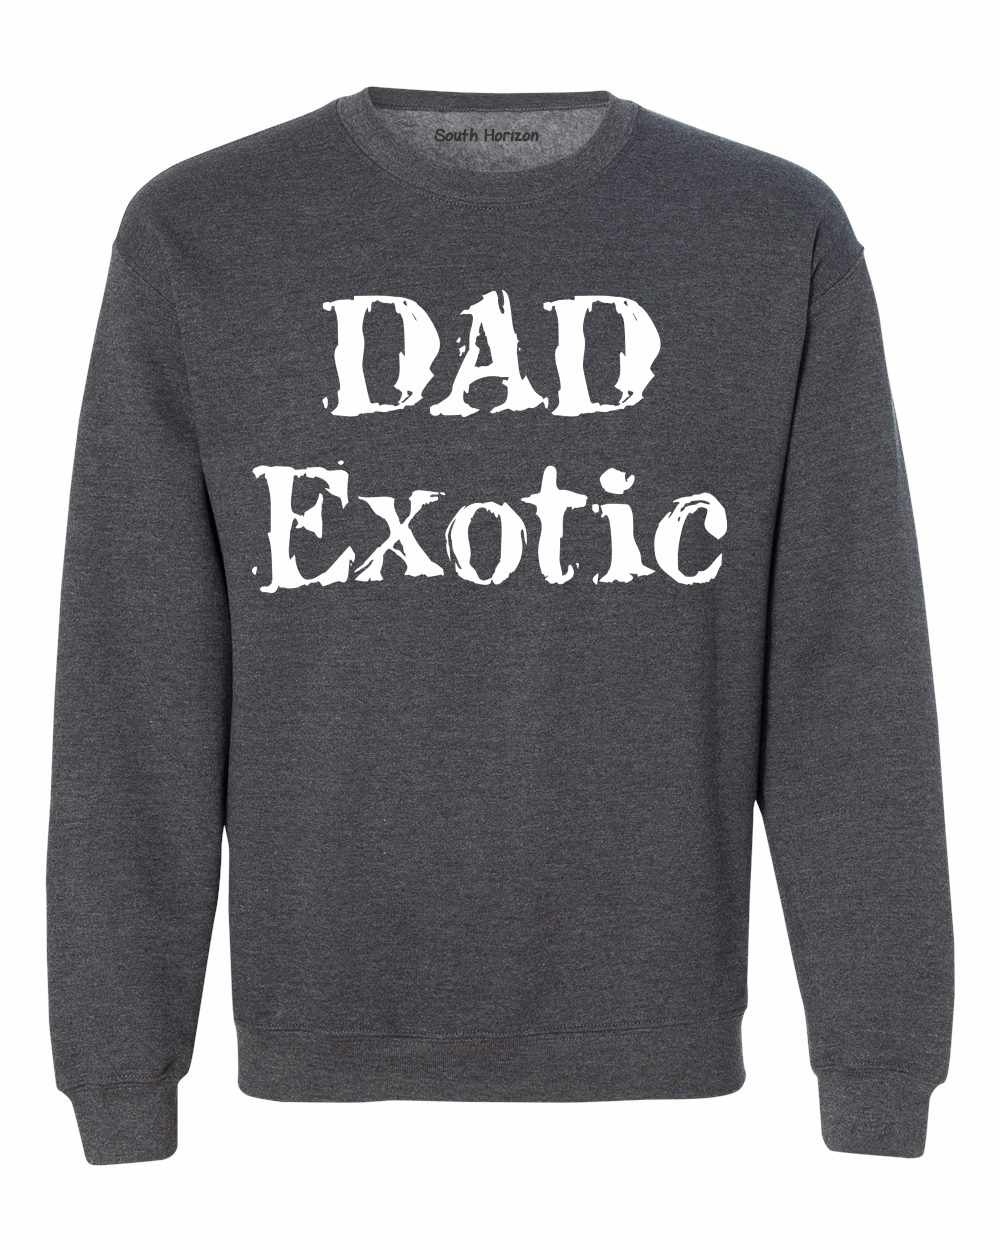 DAD EXOTIC funny Fathers Day Birthday Shirt Sweat Shirt (#1117-11)